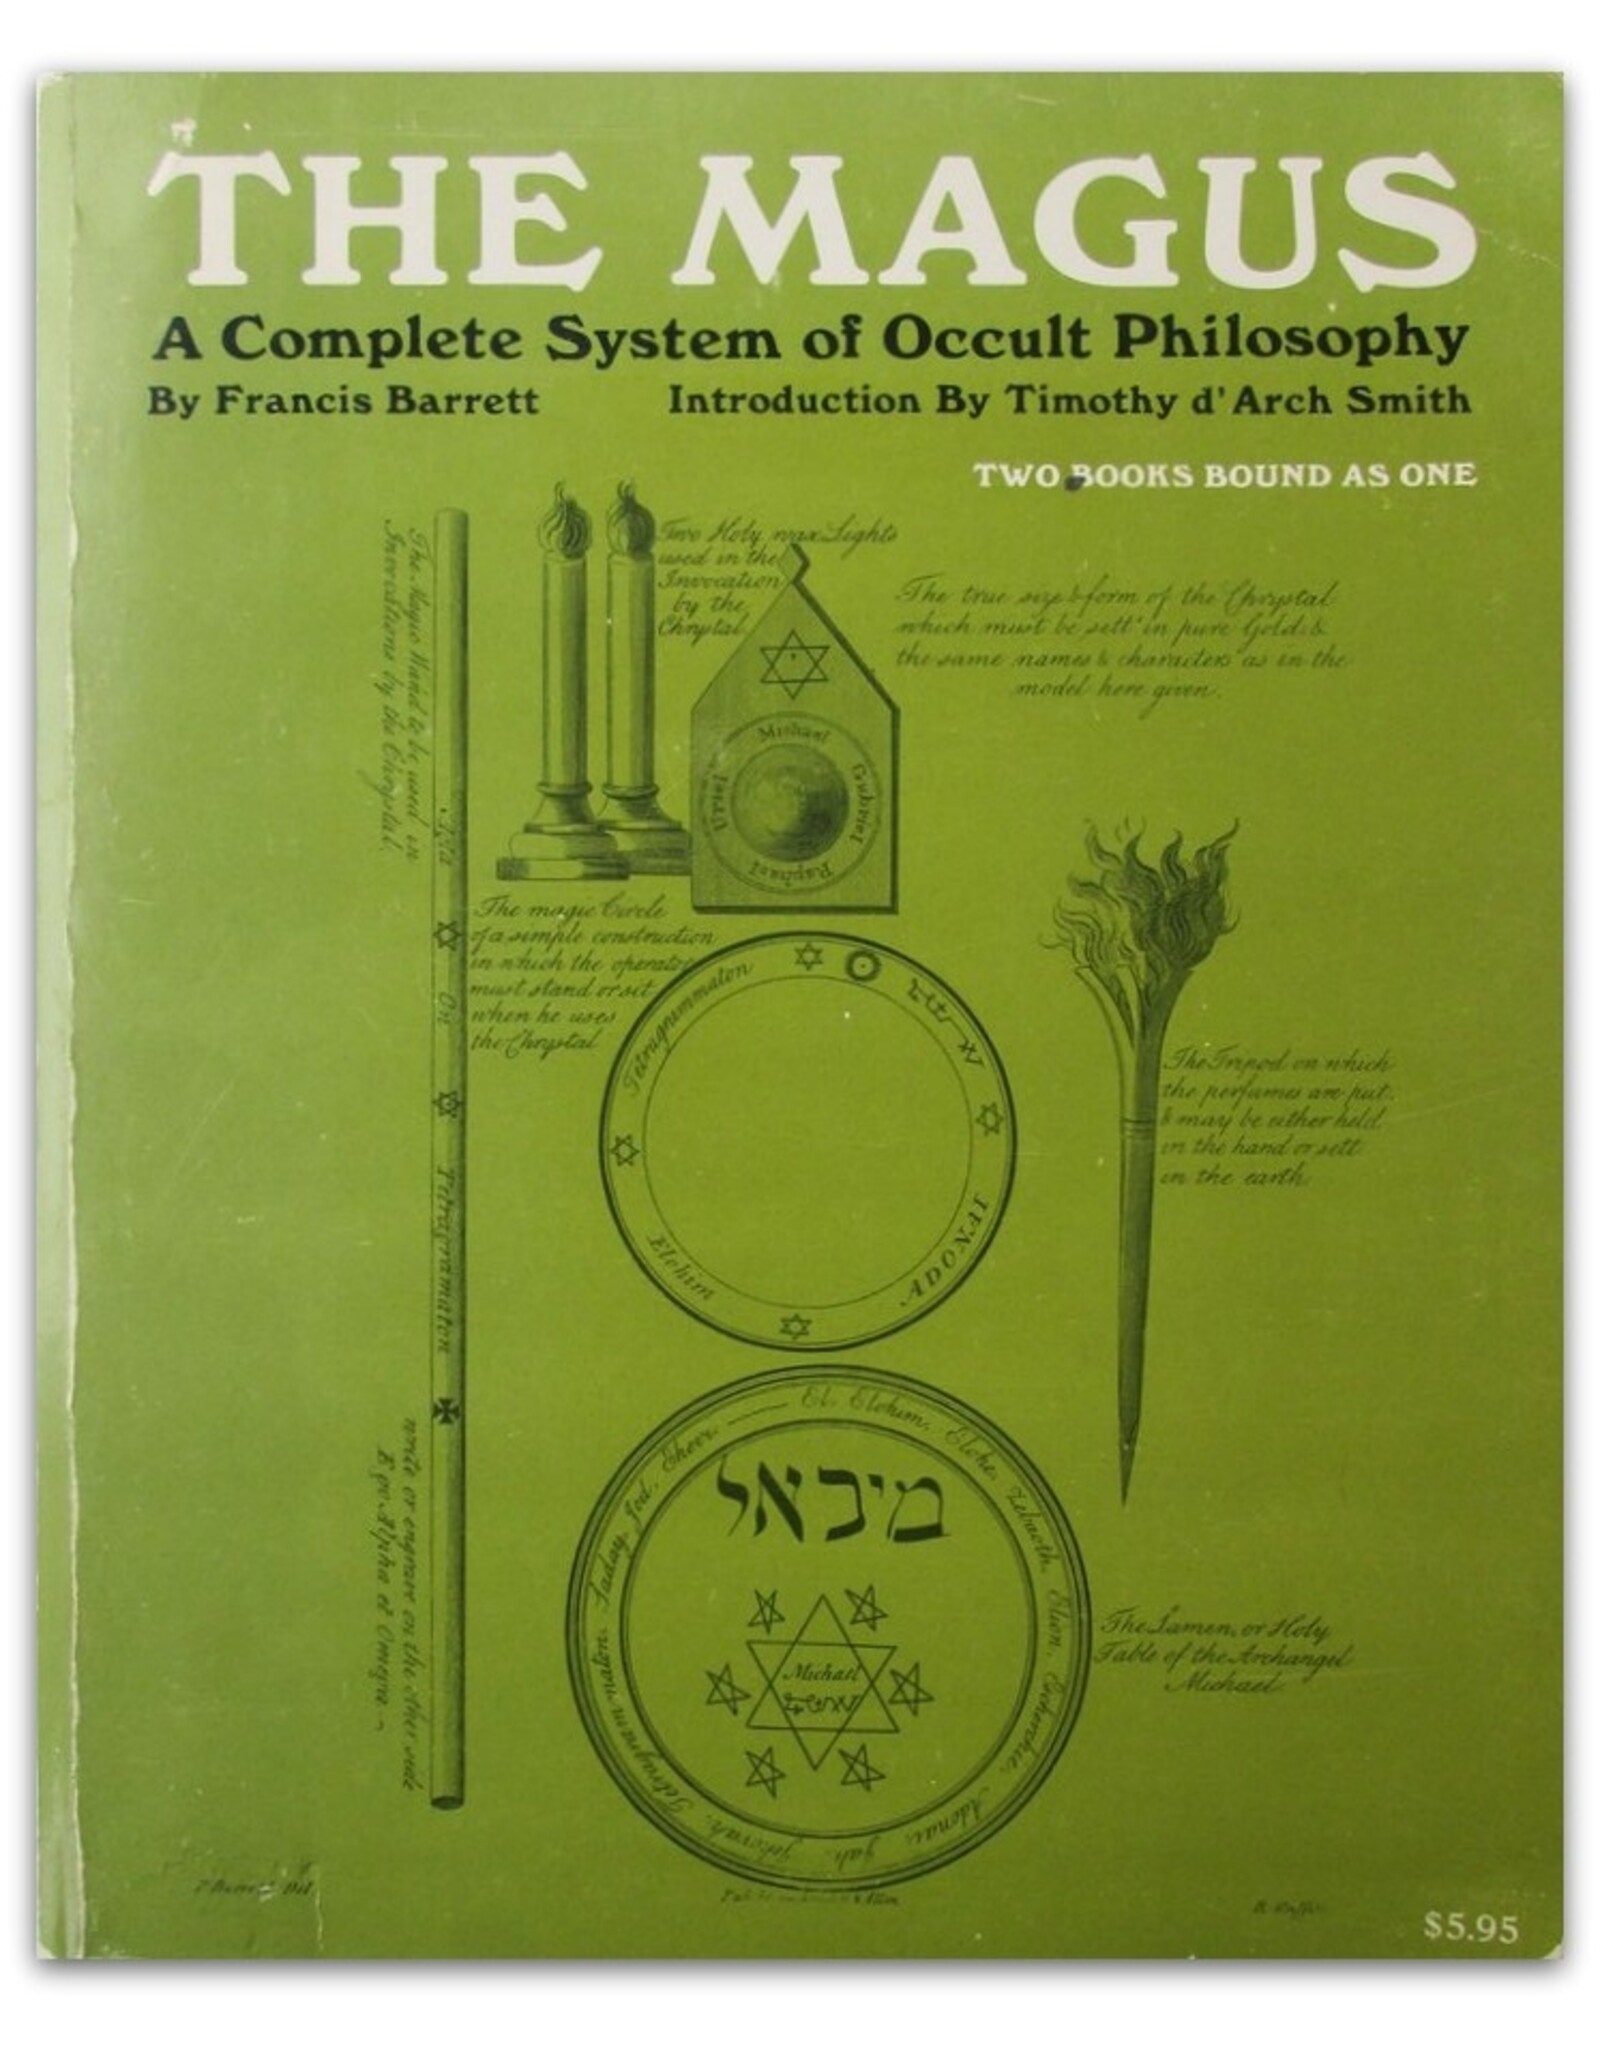 Francis Barrett - The Magus: A Complete System of Occult Philosophy. With a New Introduction by Timothy d'Arch Smith. [Two books bound as one]